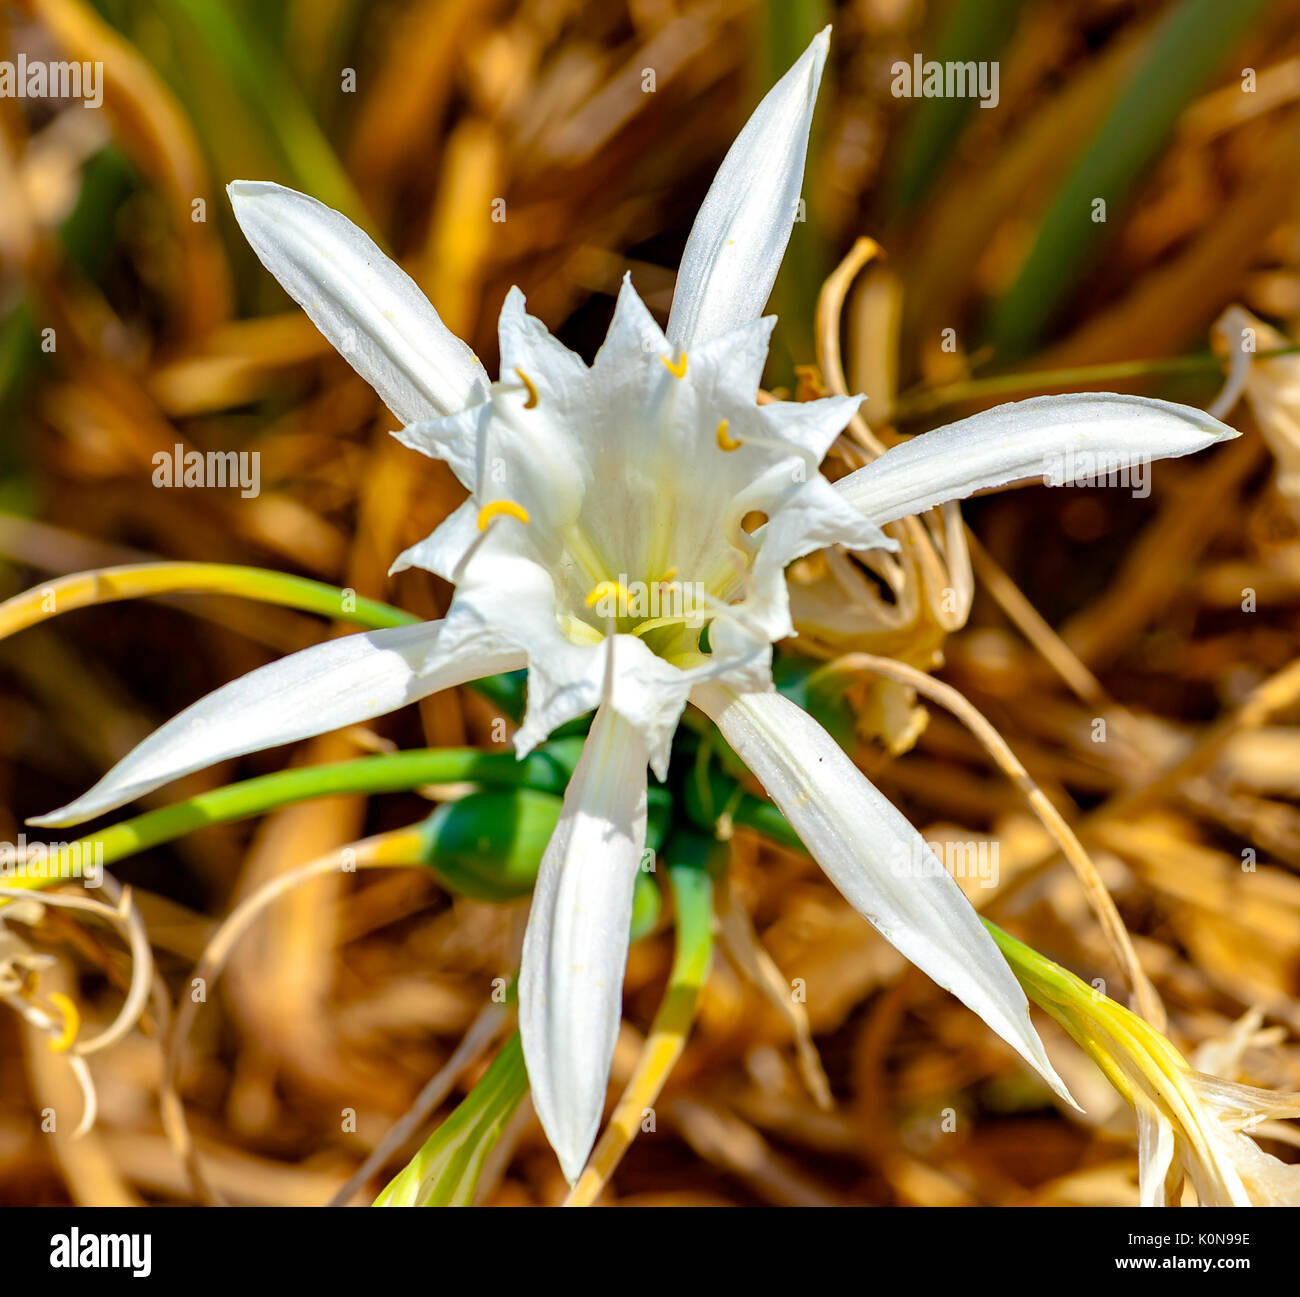 Sea lily, herbaceous plant with white flowers, large and scented, blooming in July and August, on the beach dunes of the park 'Coast Dune' Stock Photo